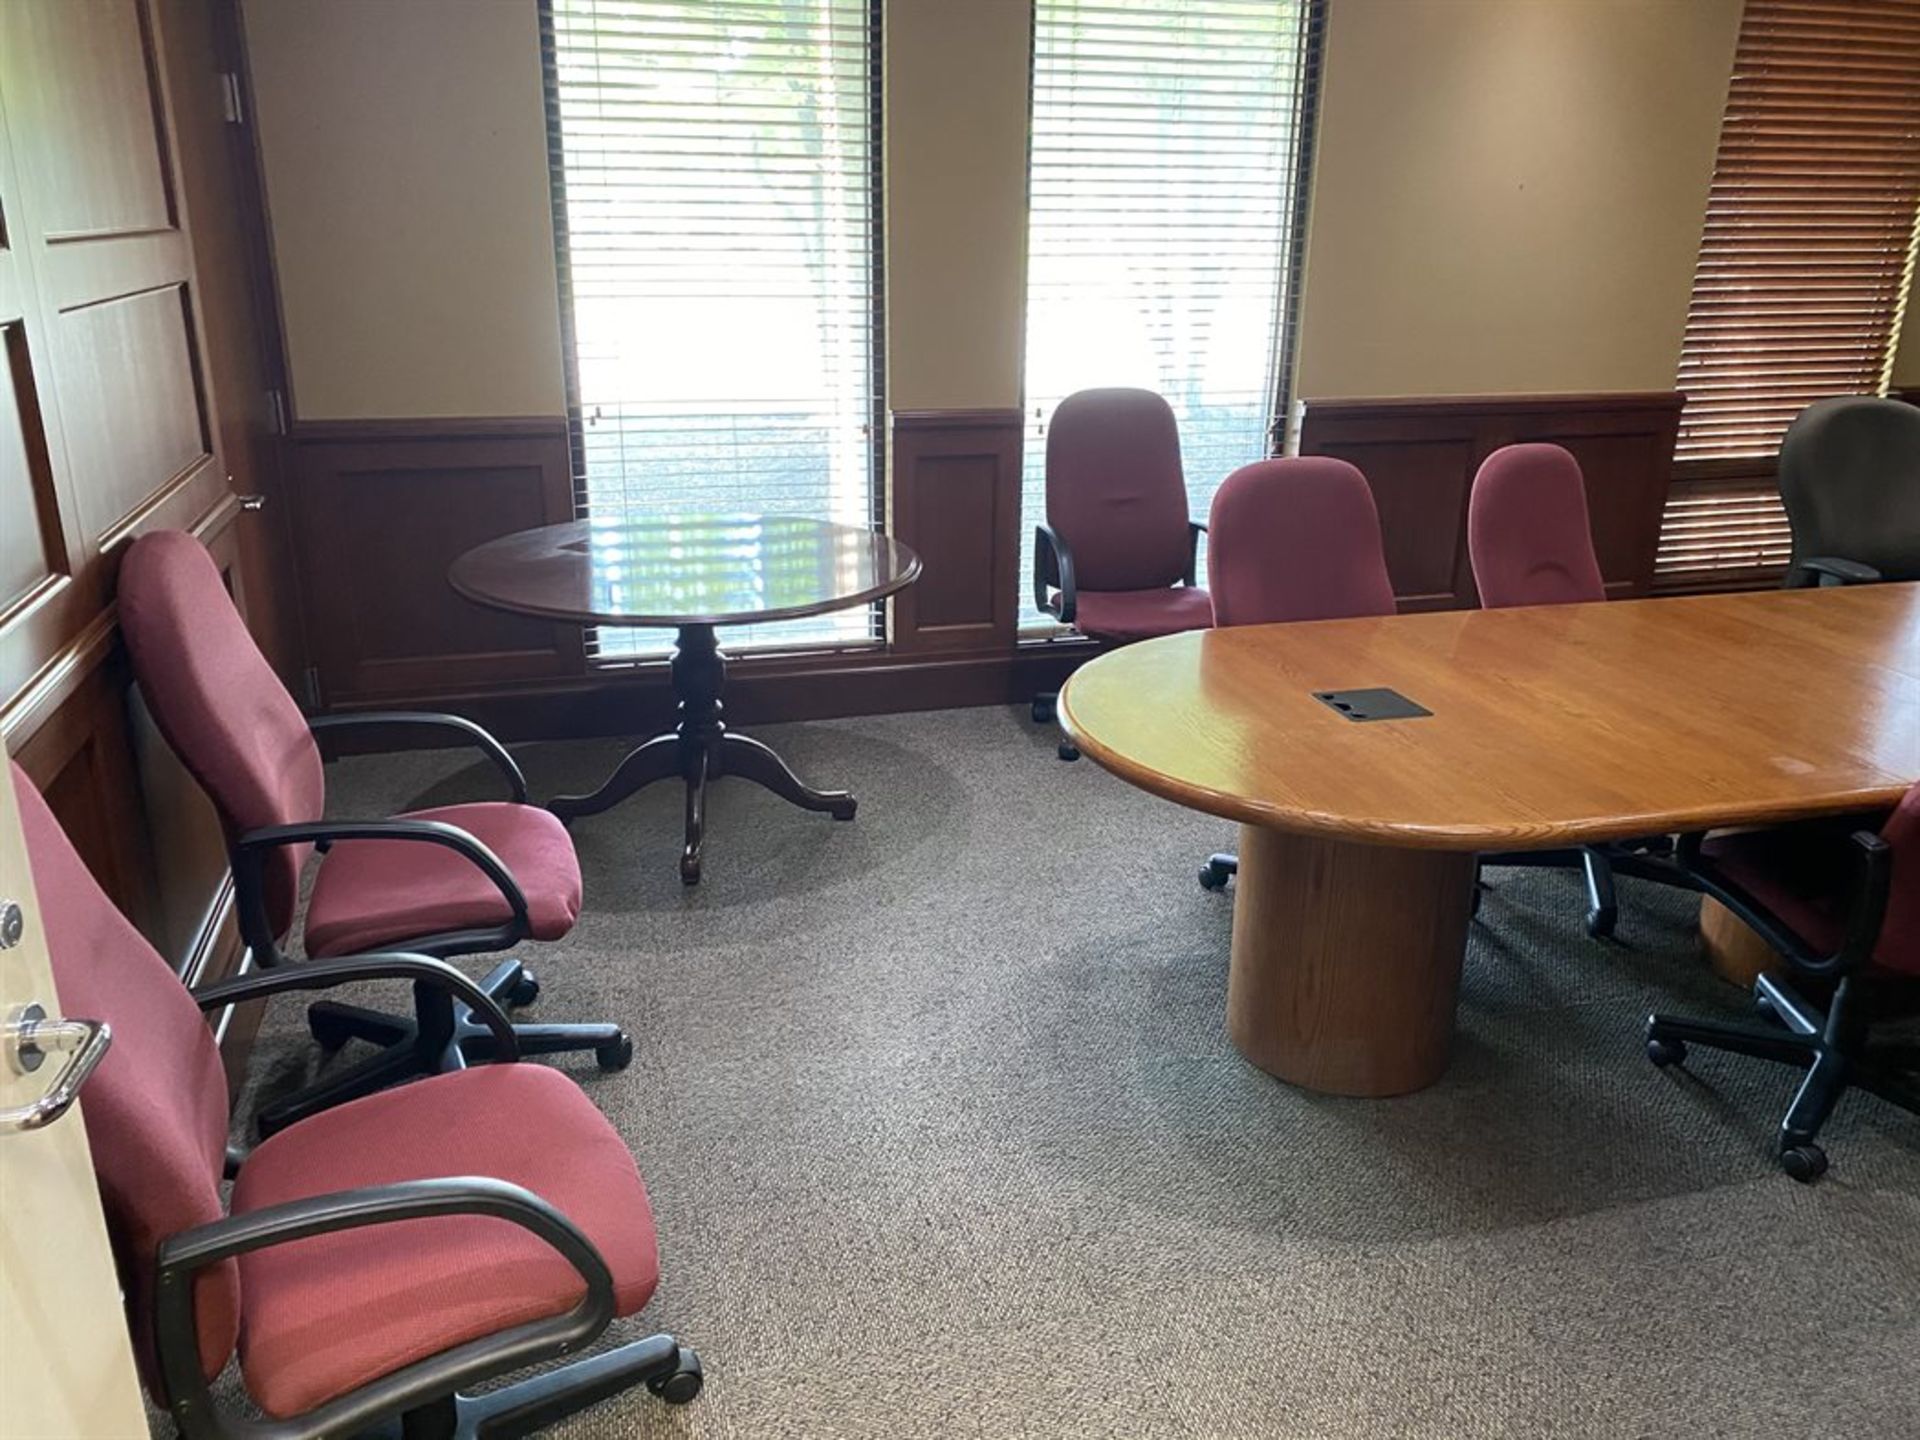 Conference Room Furniture (Furniture Only) - Image 4 of 4